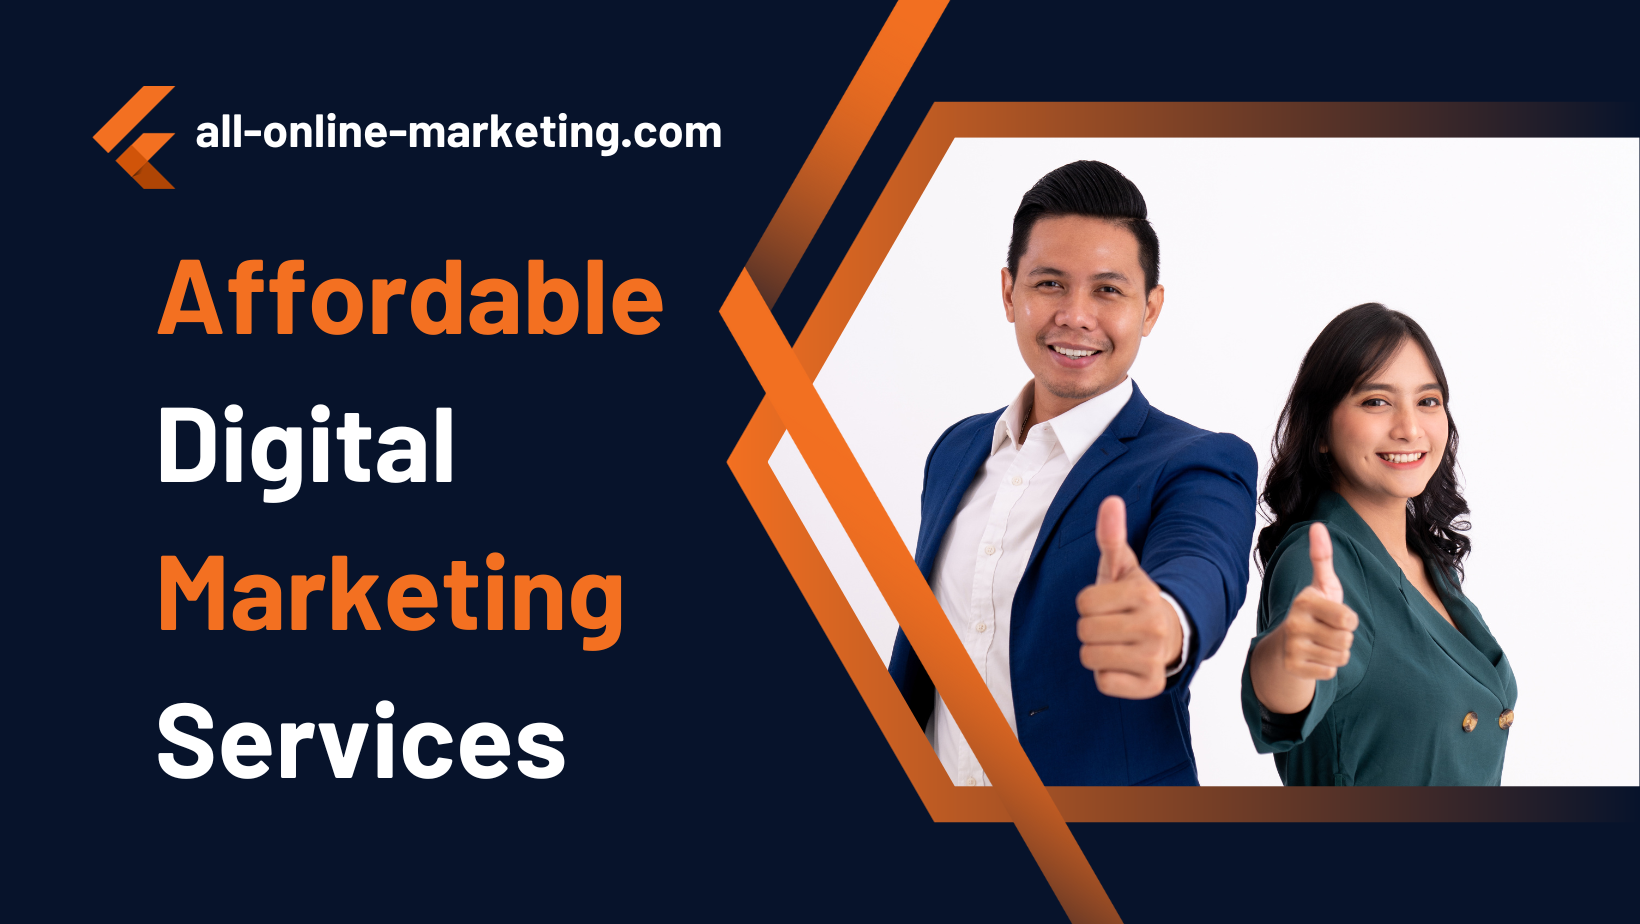 Affordable Digital Marketing Services : ðŸ”¥ Low Cost : ðŸ”¥ Amazing Price : Competitive Pricing to Generate Sales Leads for Your Business. all-online-marketing.com